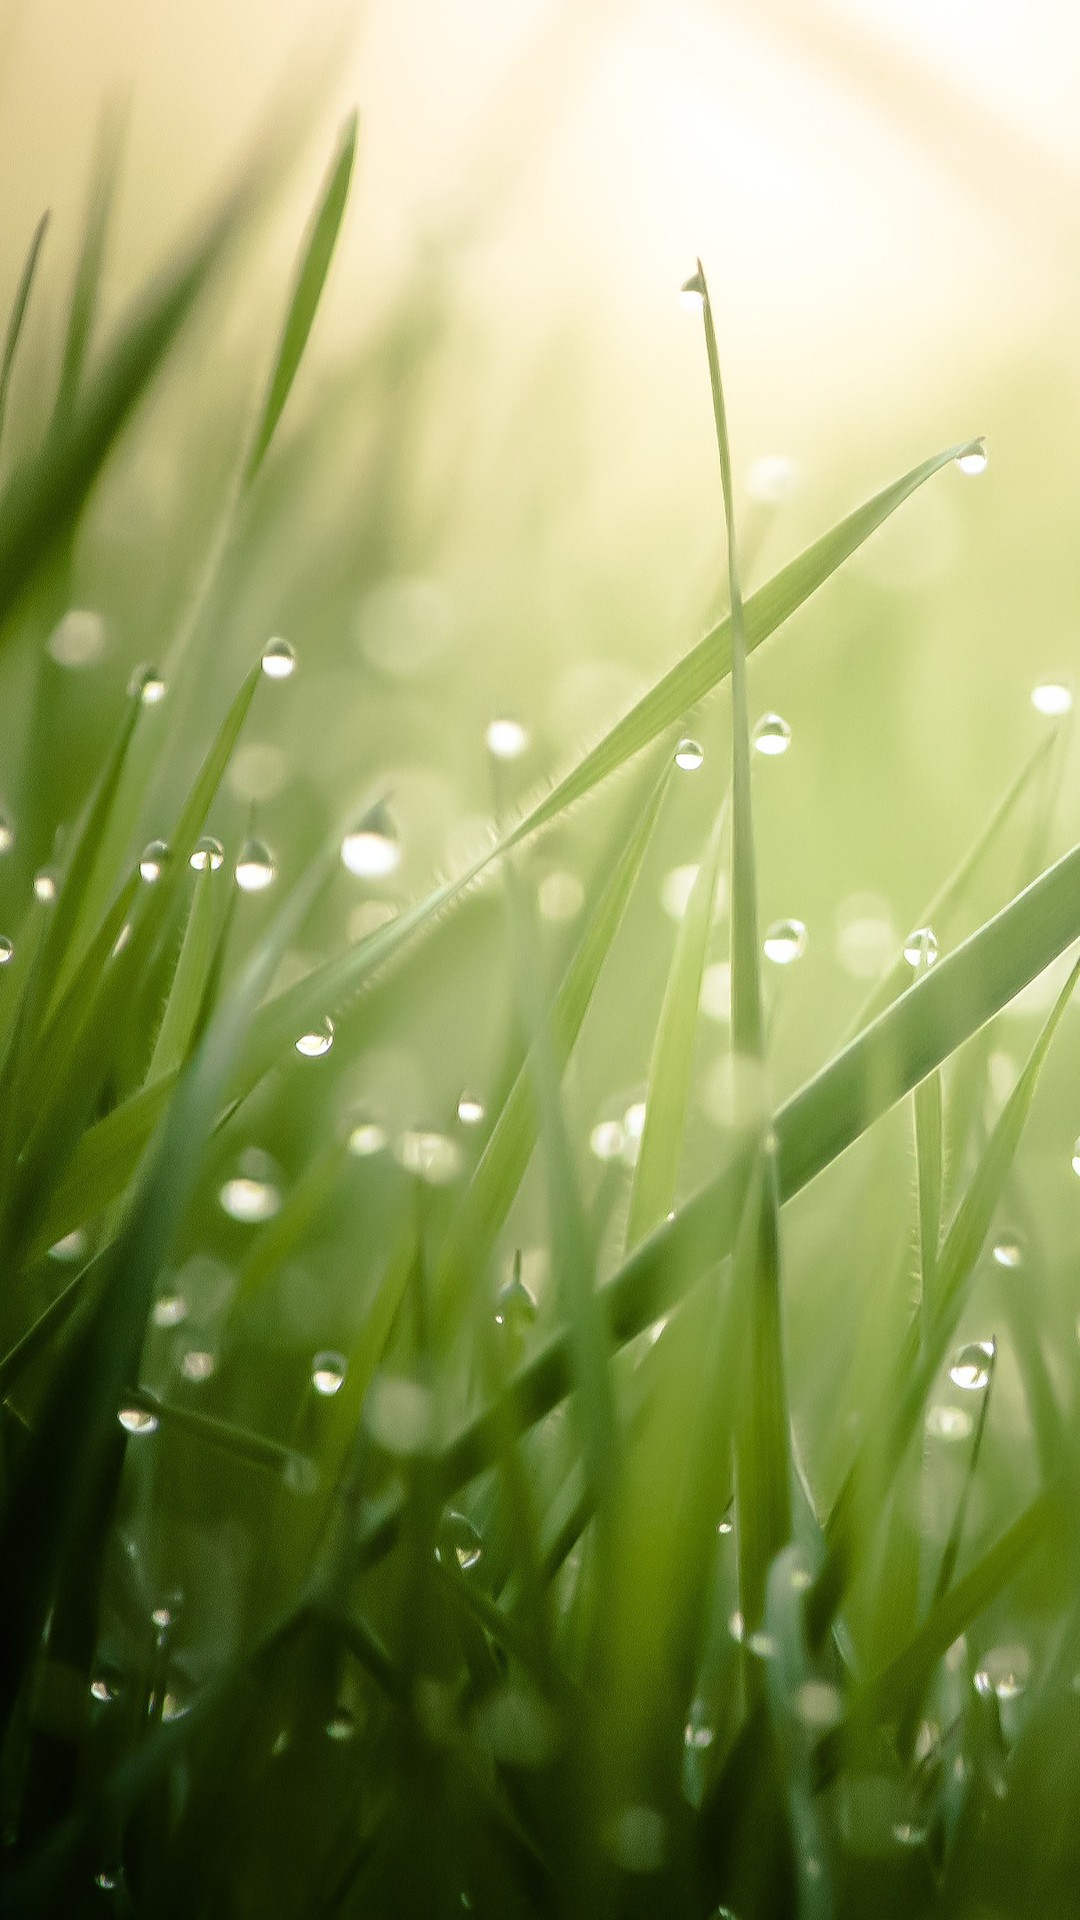 General 1080x1920 plants water drops grass nature